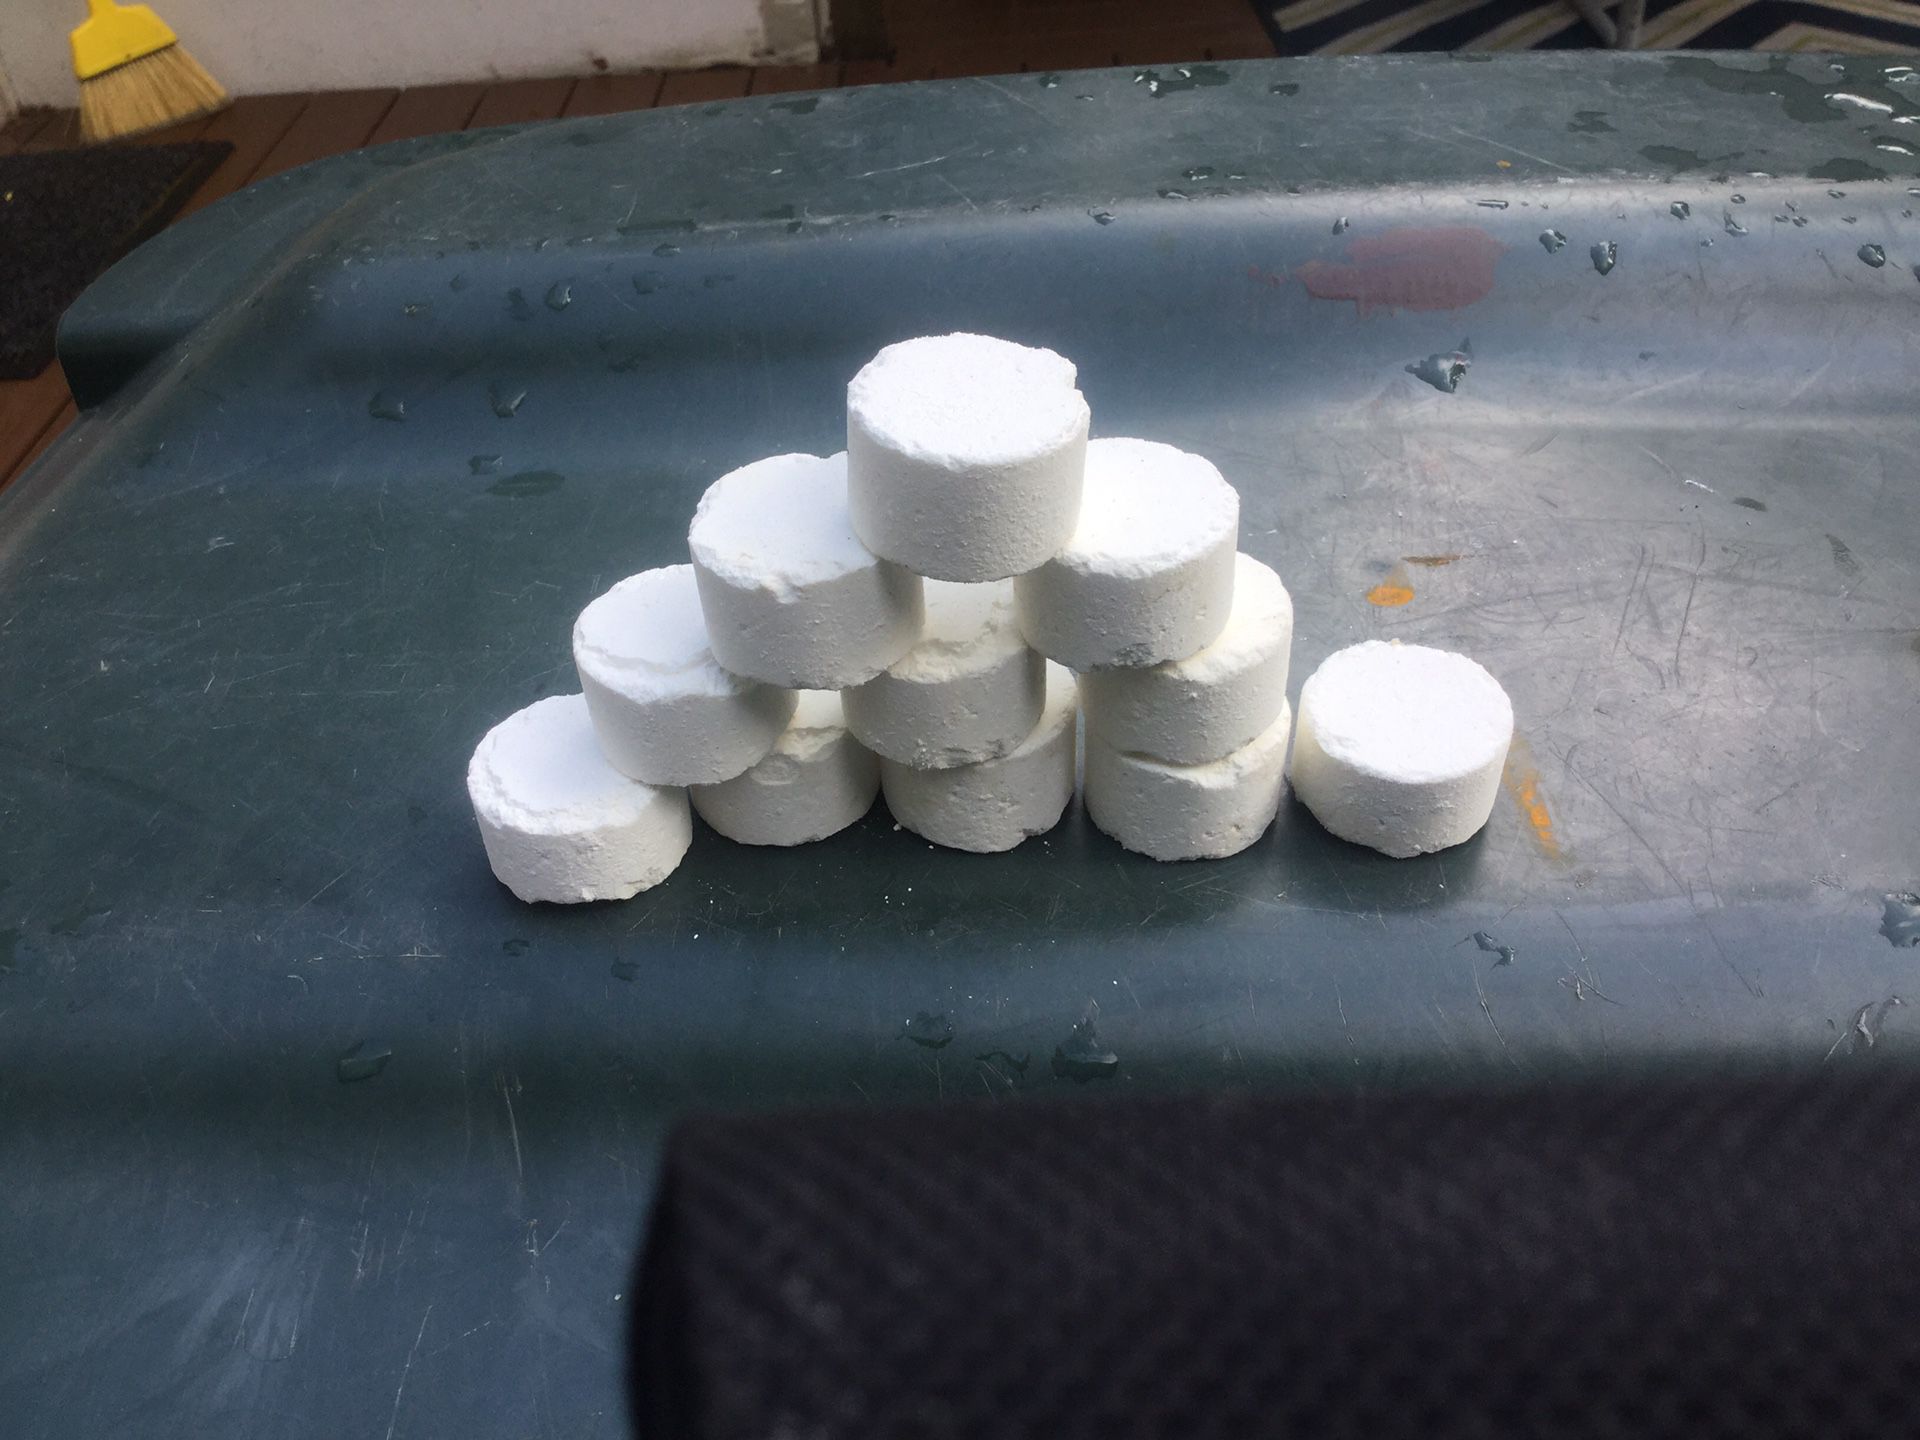 Bromine tablets for hot tub About 35 pounds